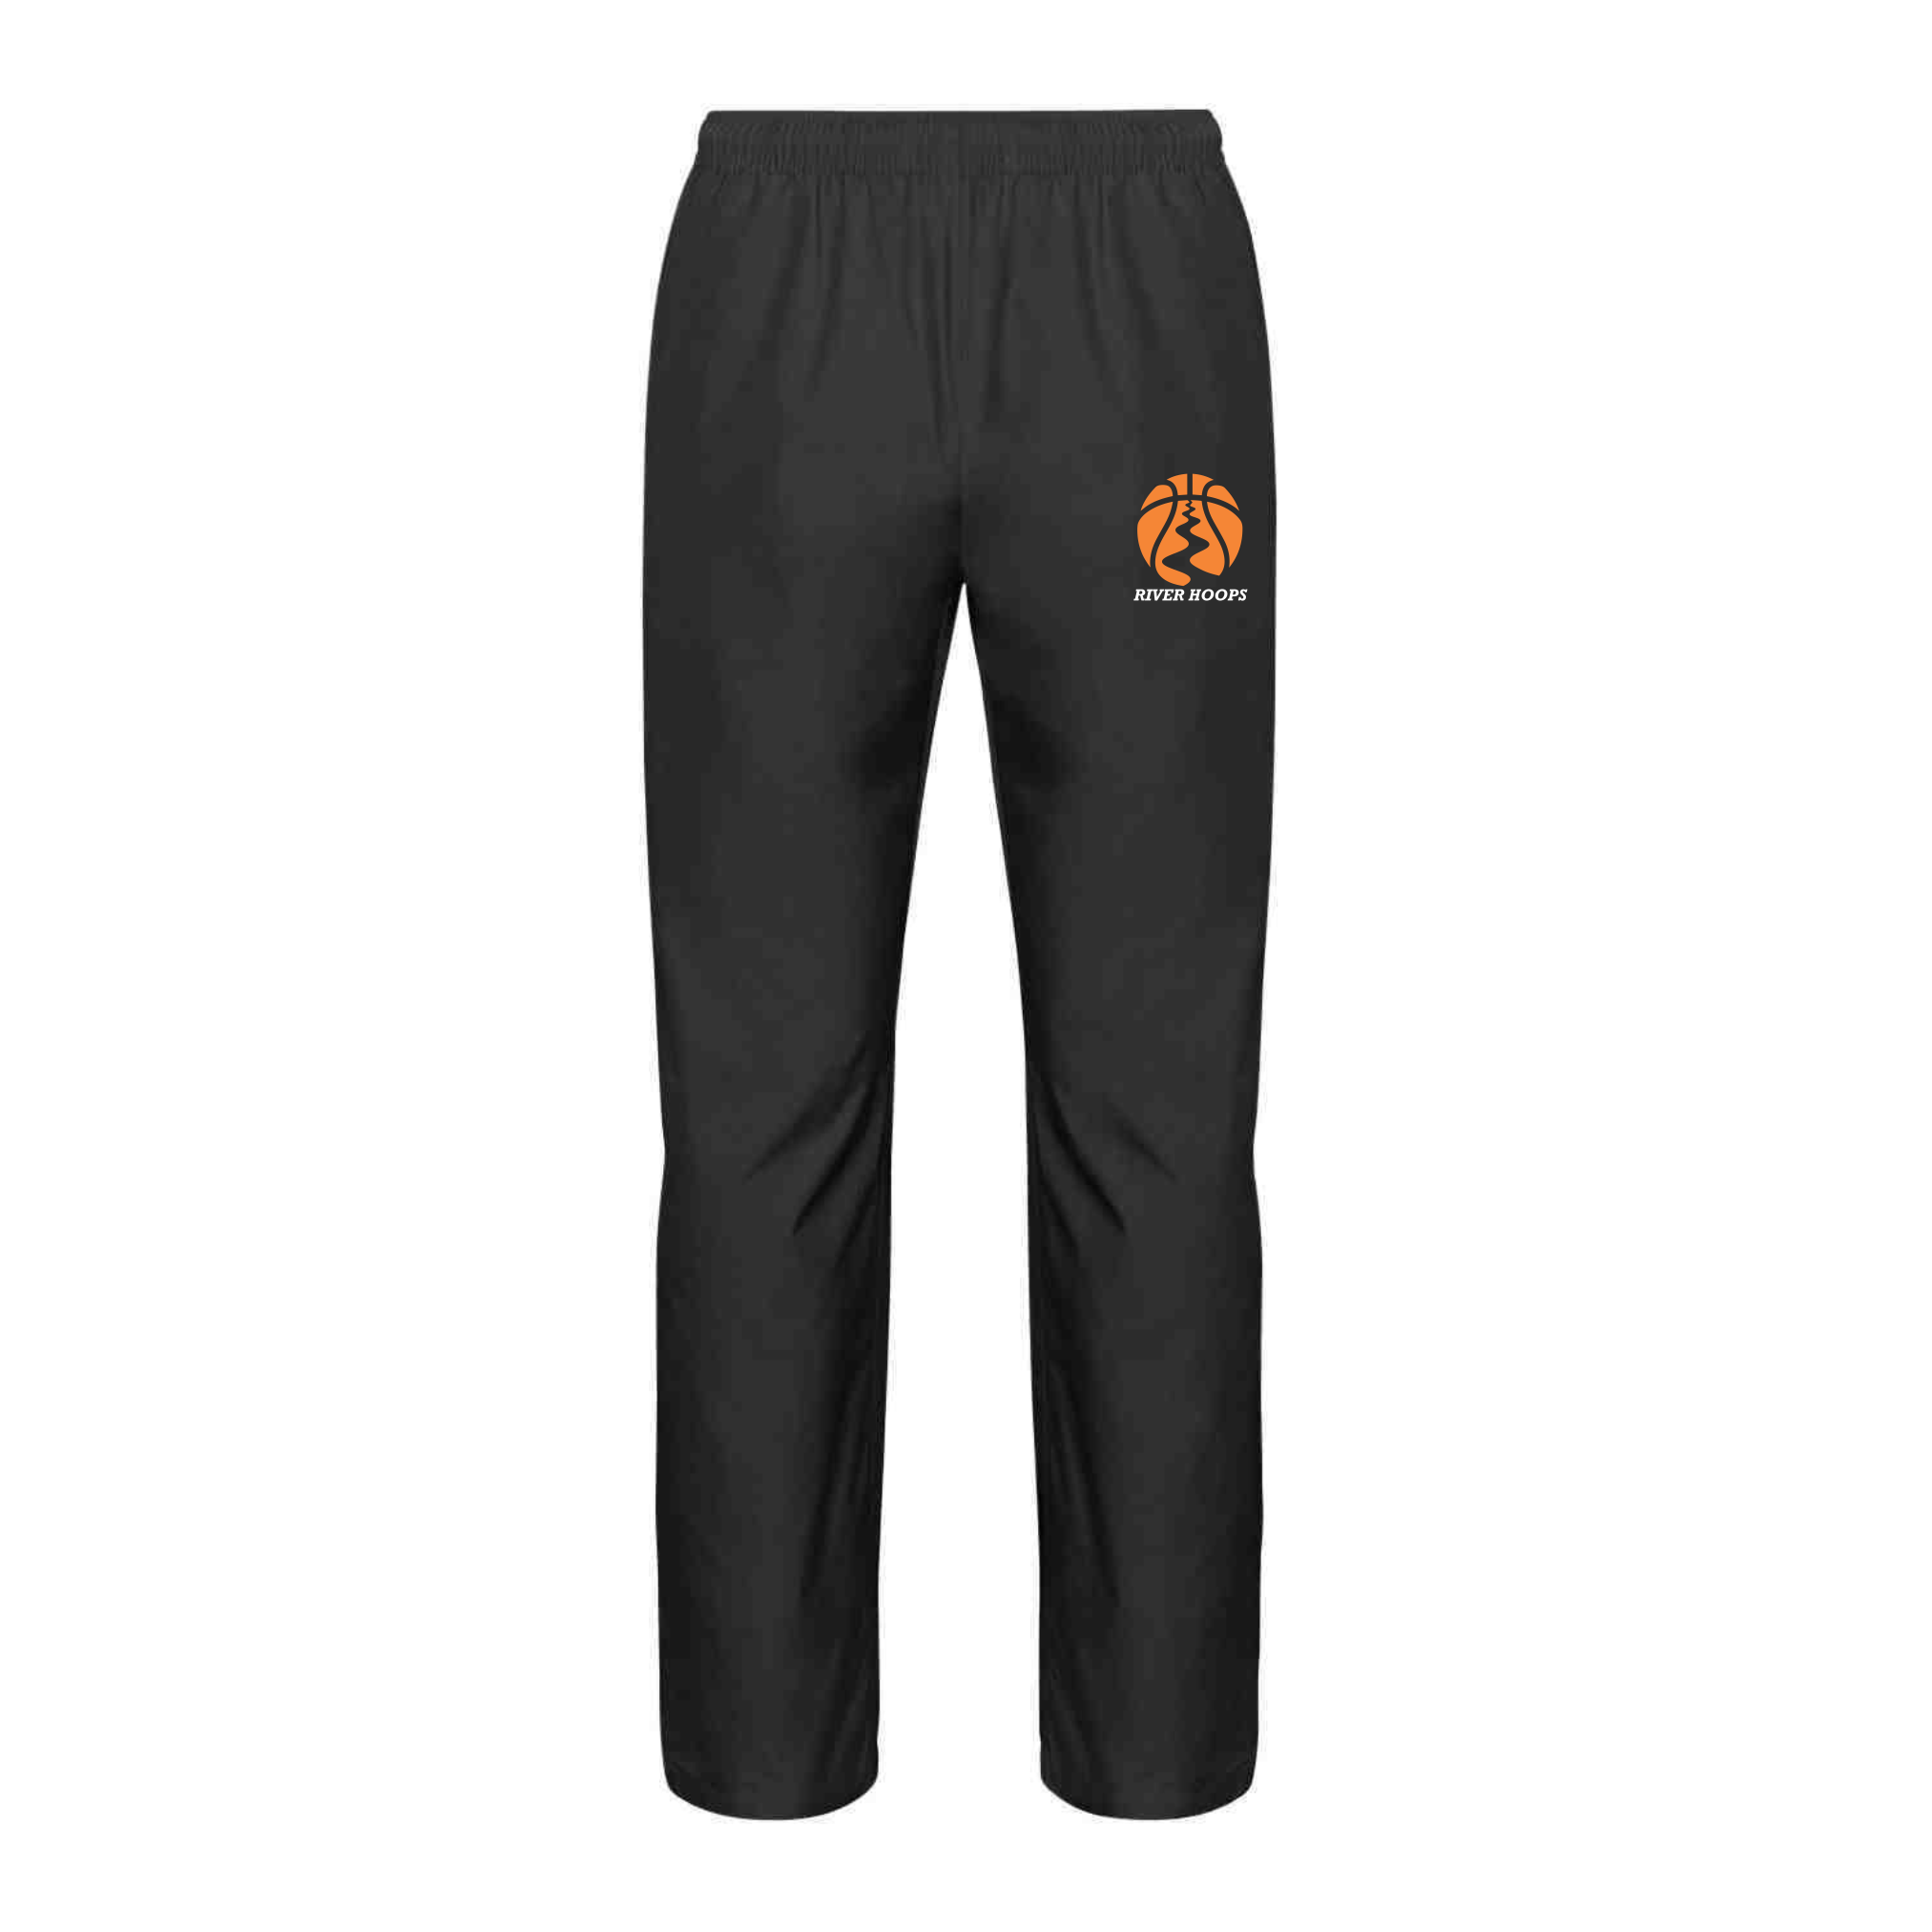 River Hoops - Mesh Lined Track Pants